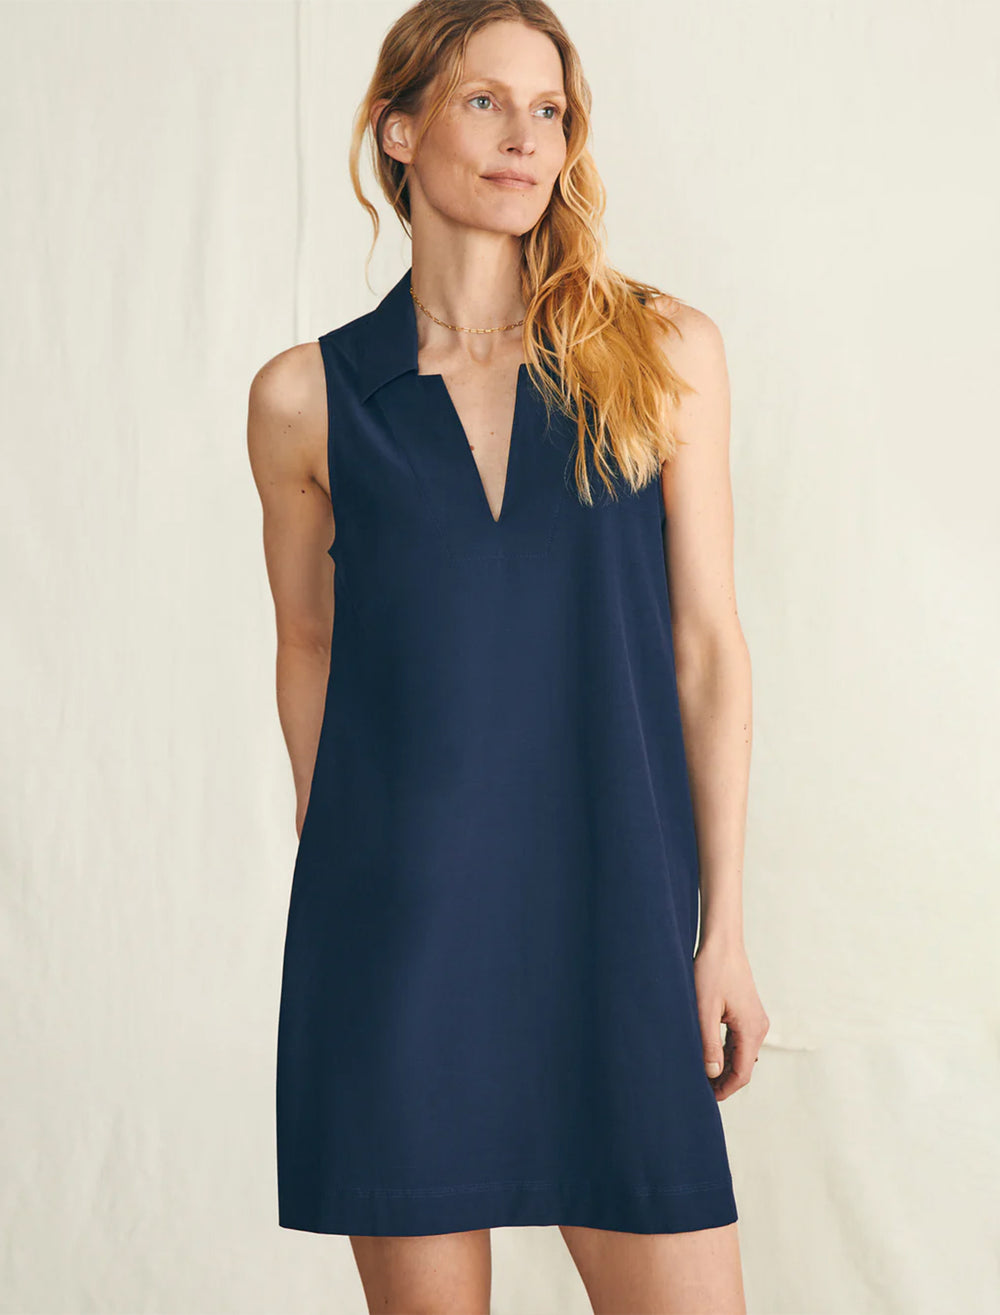 Model wearing Faherty's all day polo dress in navy blazer.